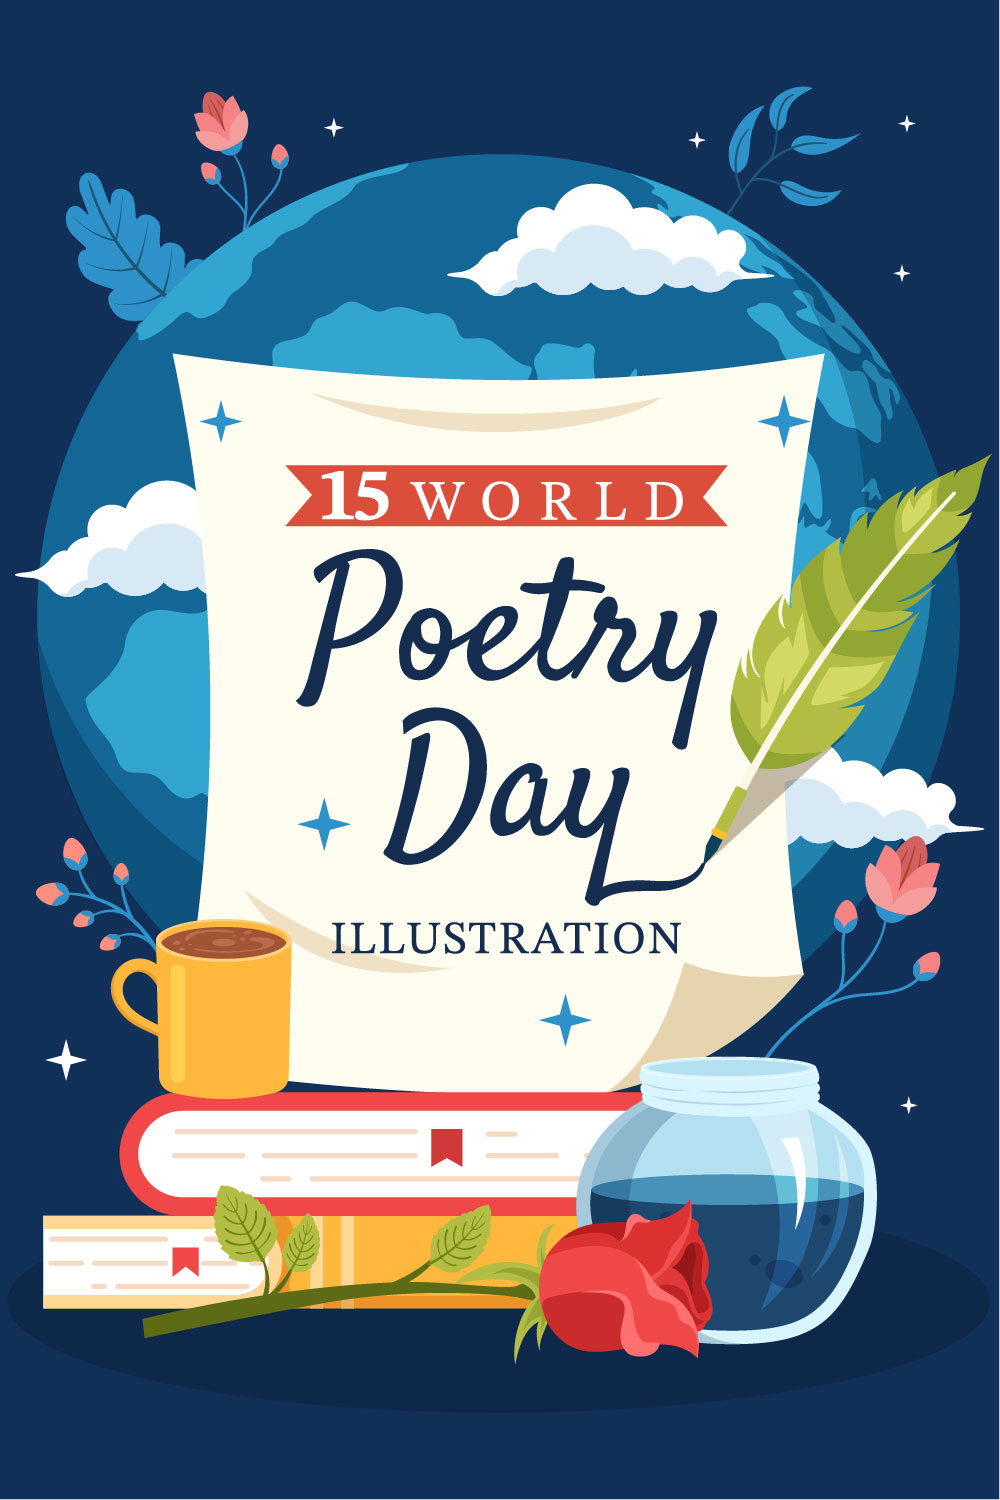 15 World Poetry Day Illustration pinterest preview image.